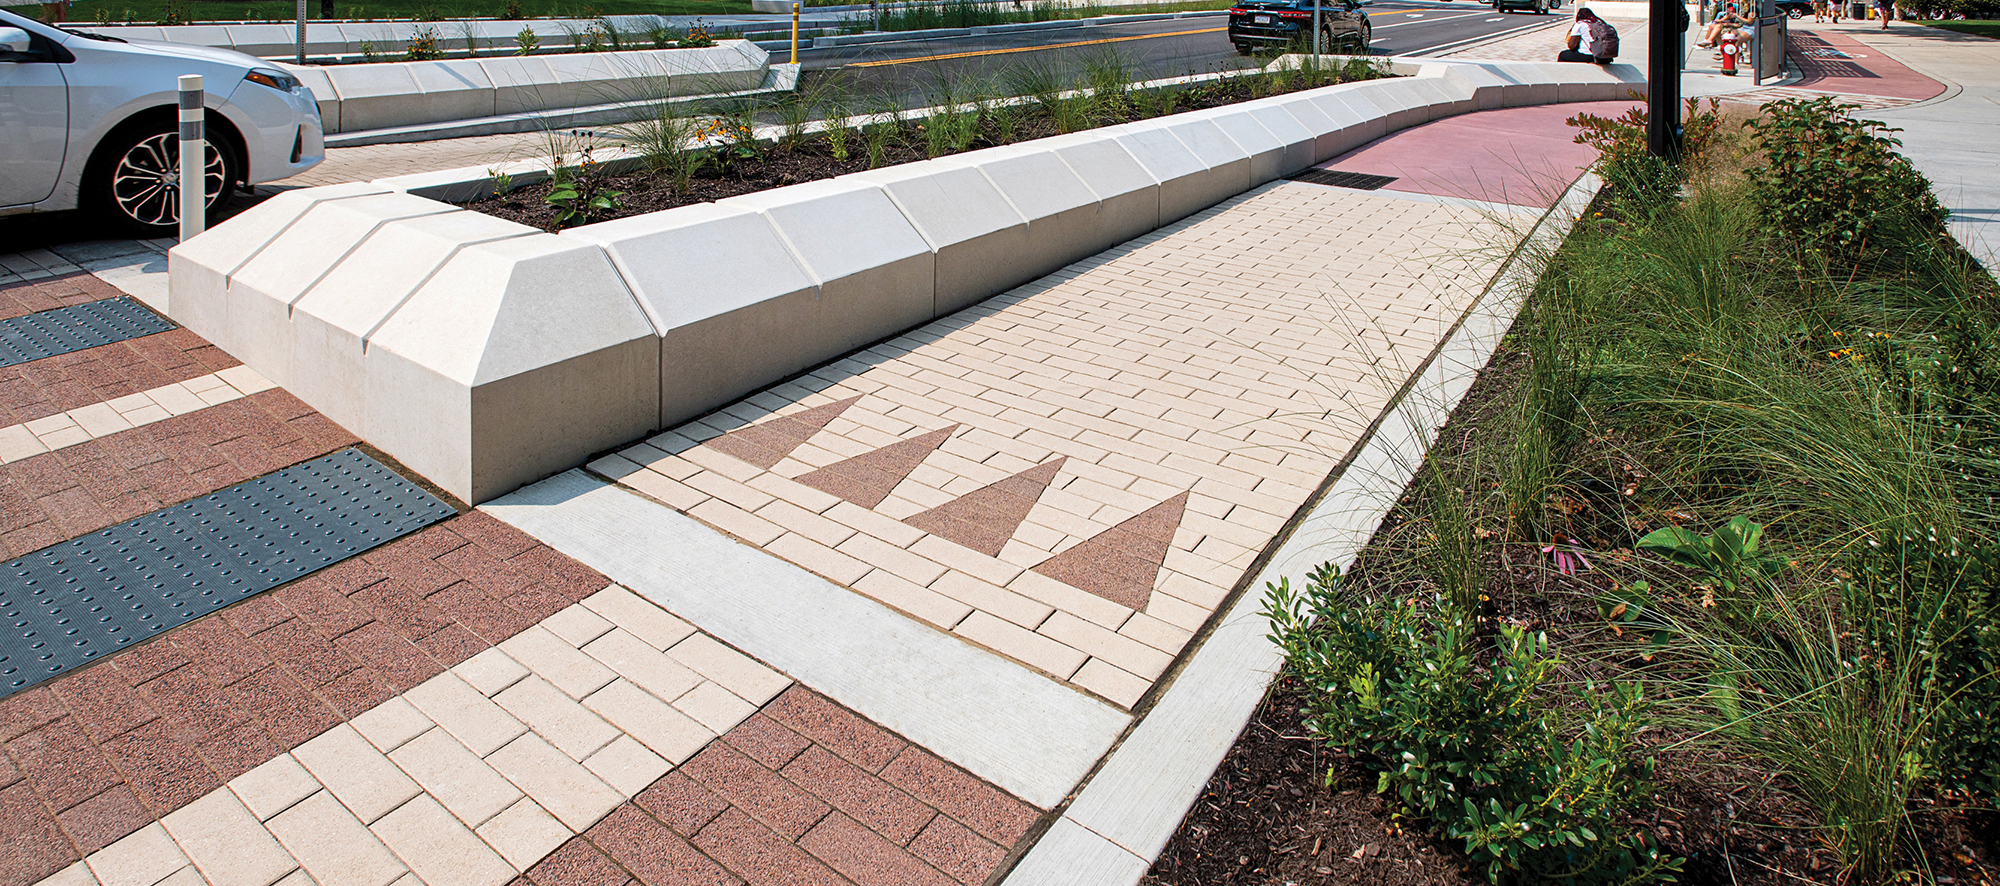 Cars drive on a streetscape with curb gardens, landscaping and Promenade pavers in contrasting colors creating stripes and arrows.